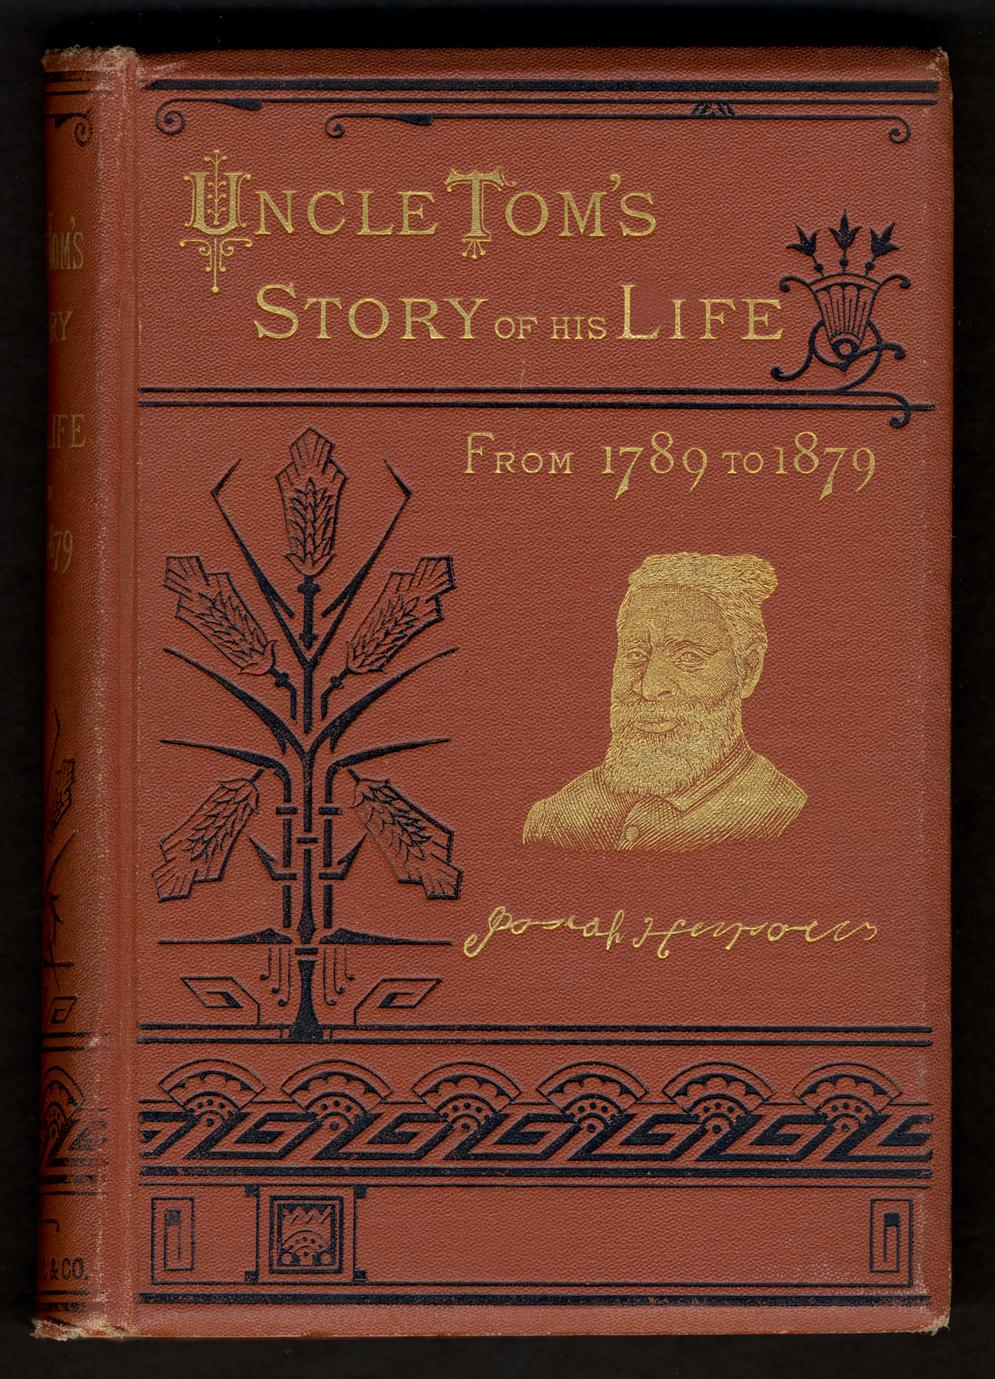 An autobiography of the Rev. Josiah Henson (Mrs. Harriet Beecher Stowe's "Uncle Tom") from 1789 to 1879 (1 of 2)